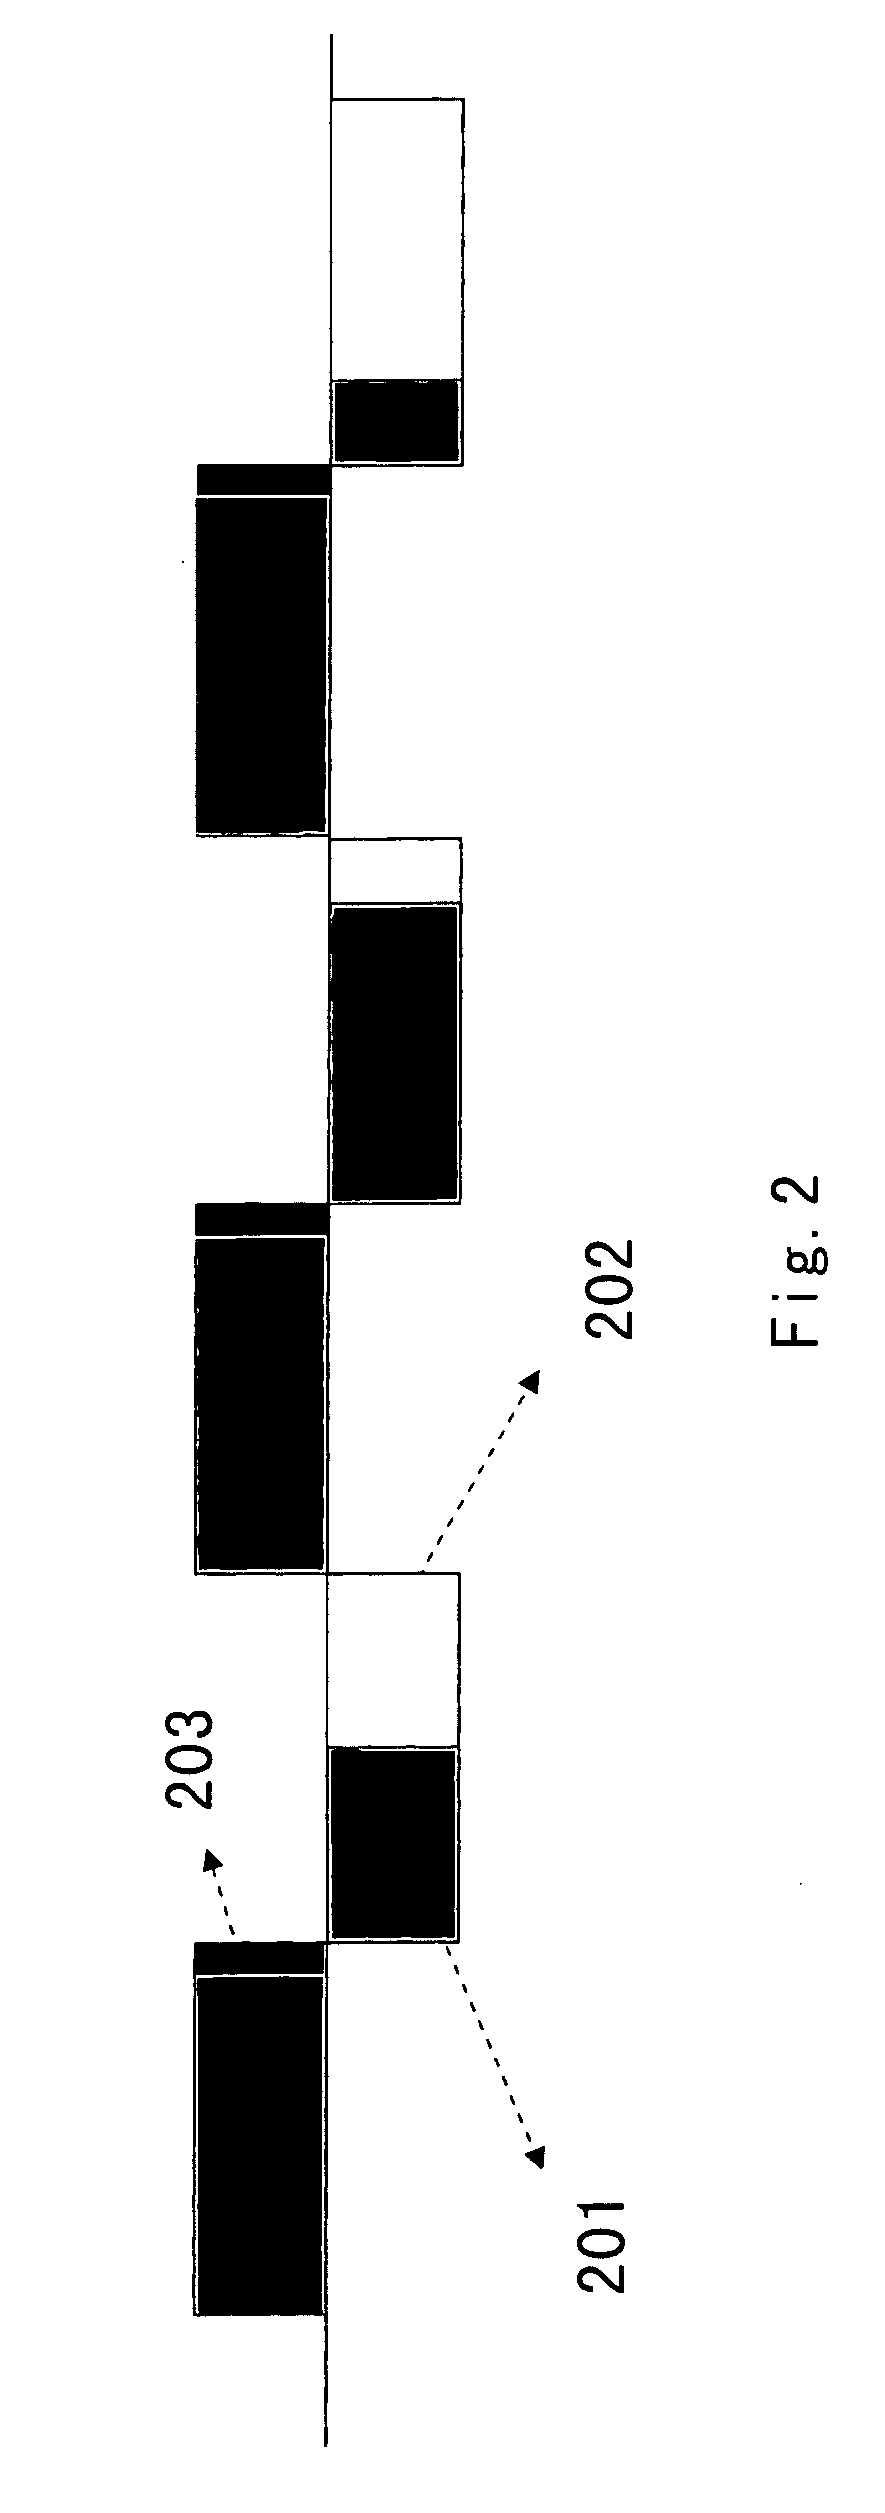 Method and device for integrating a cellular network and a ubiquitous network